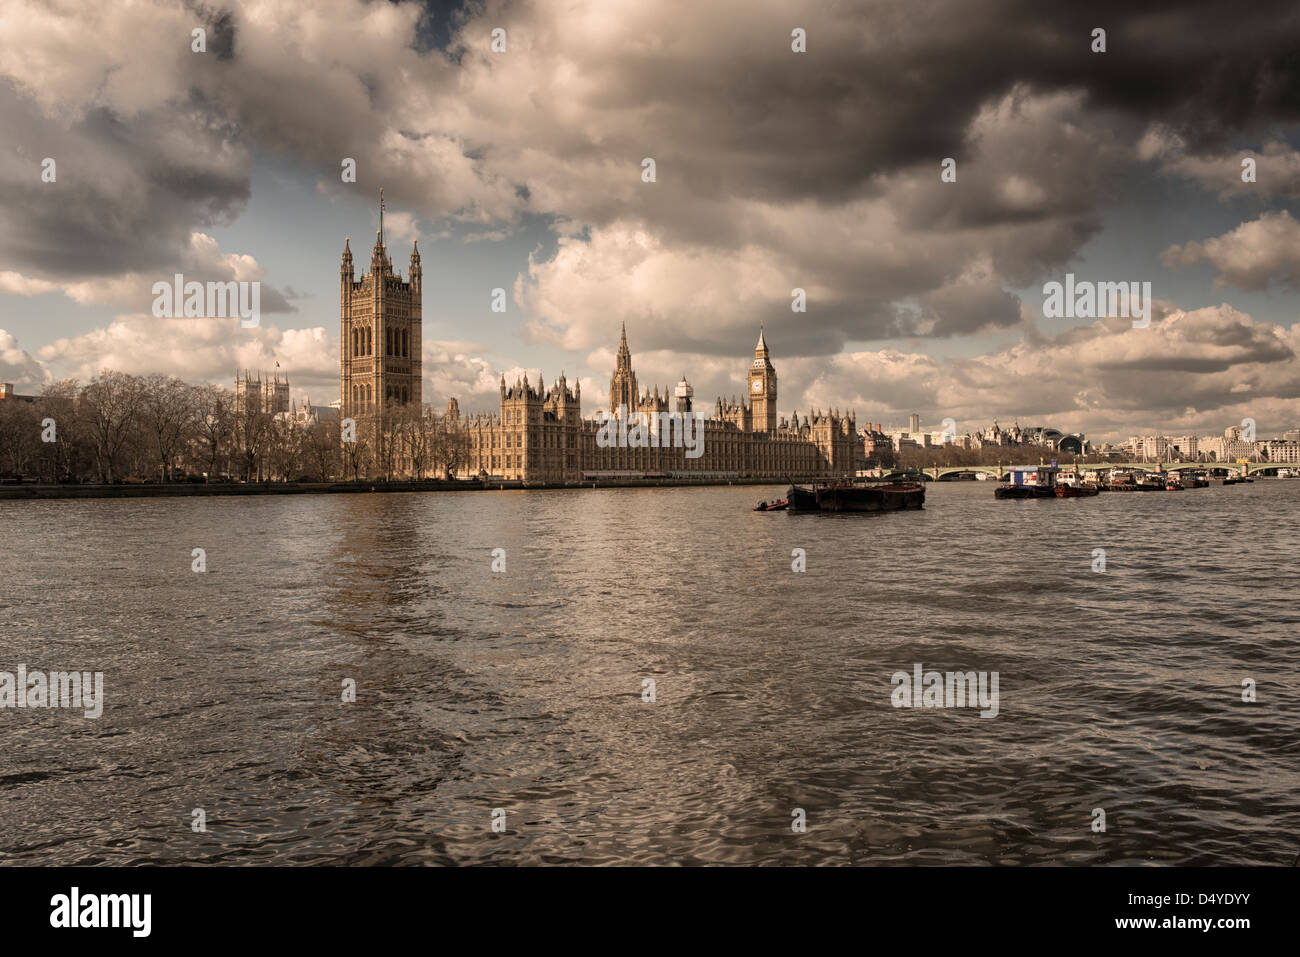 The House of Parliament on the river Thames,London,England Stock Photo